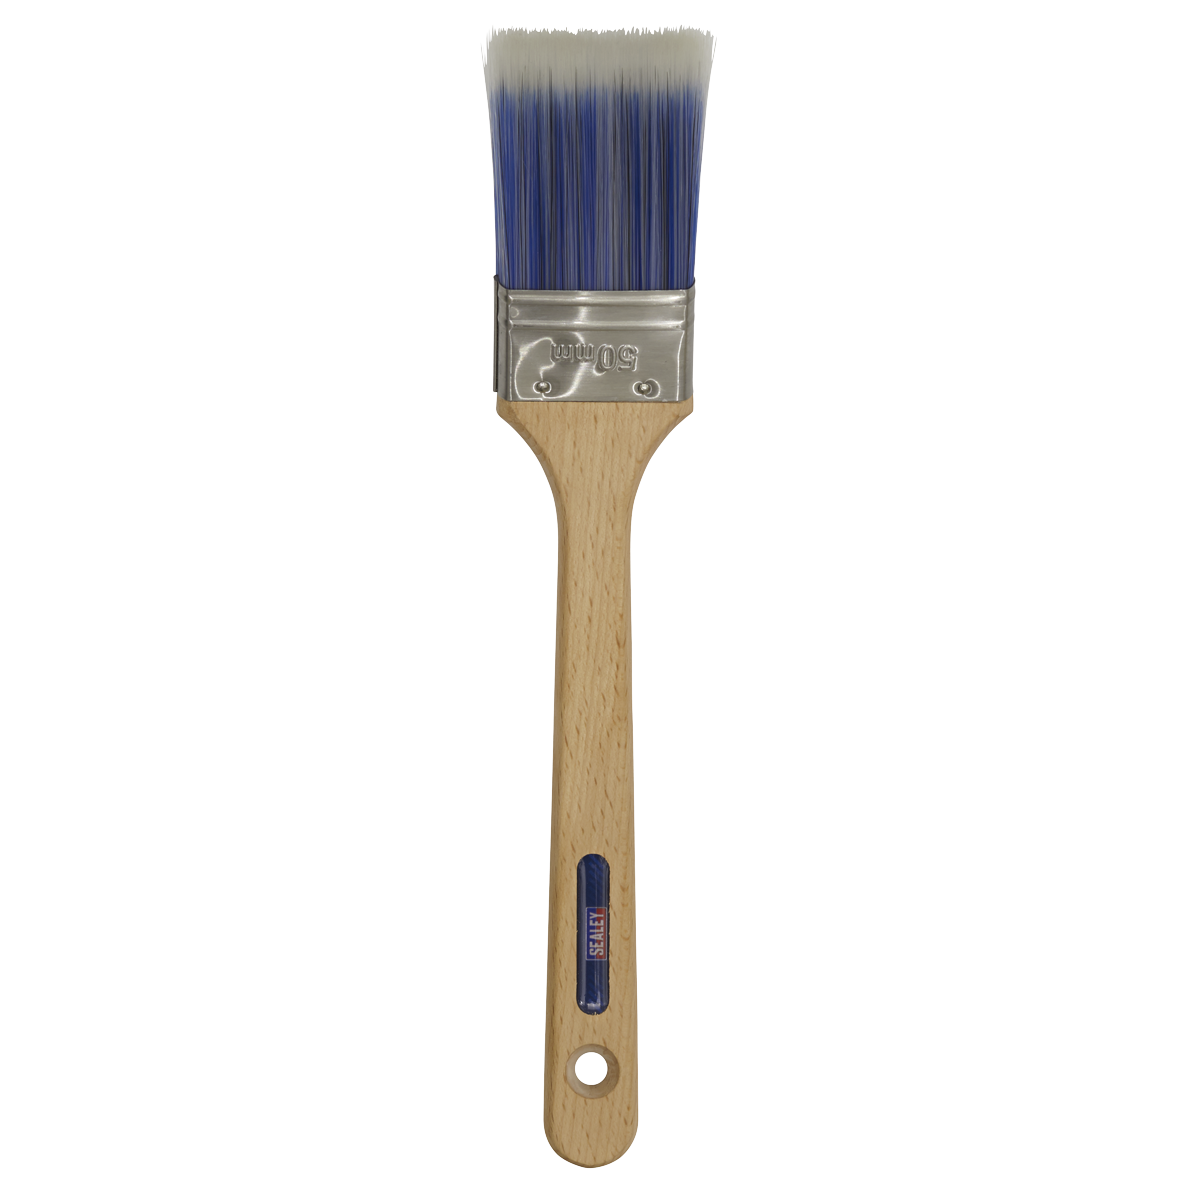 Sealey paint brush for tight angles